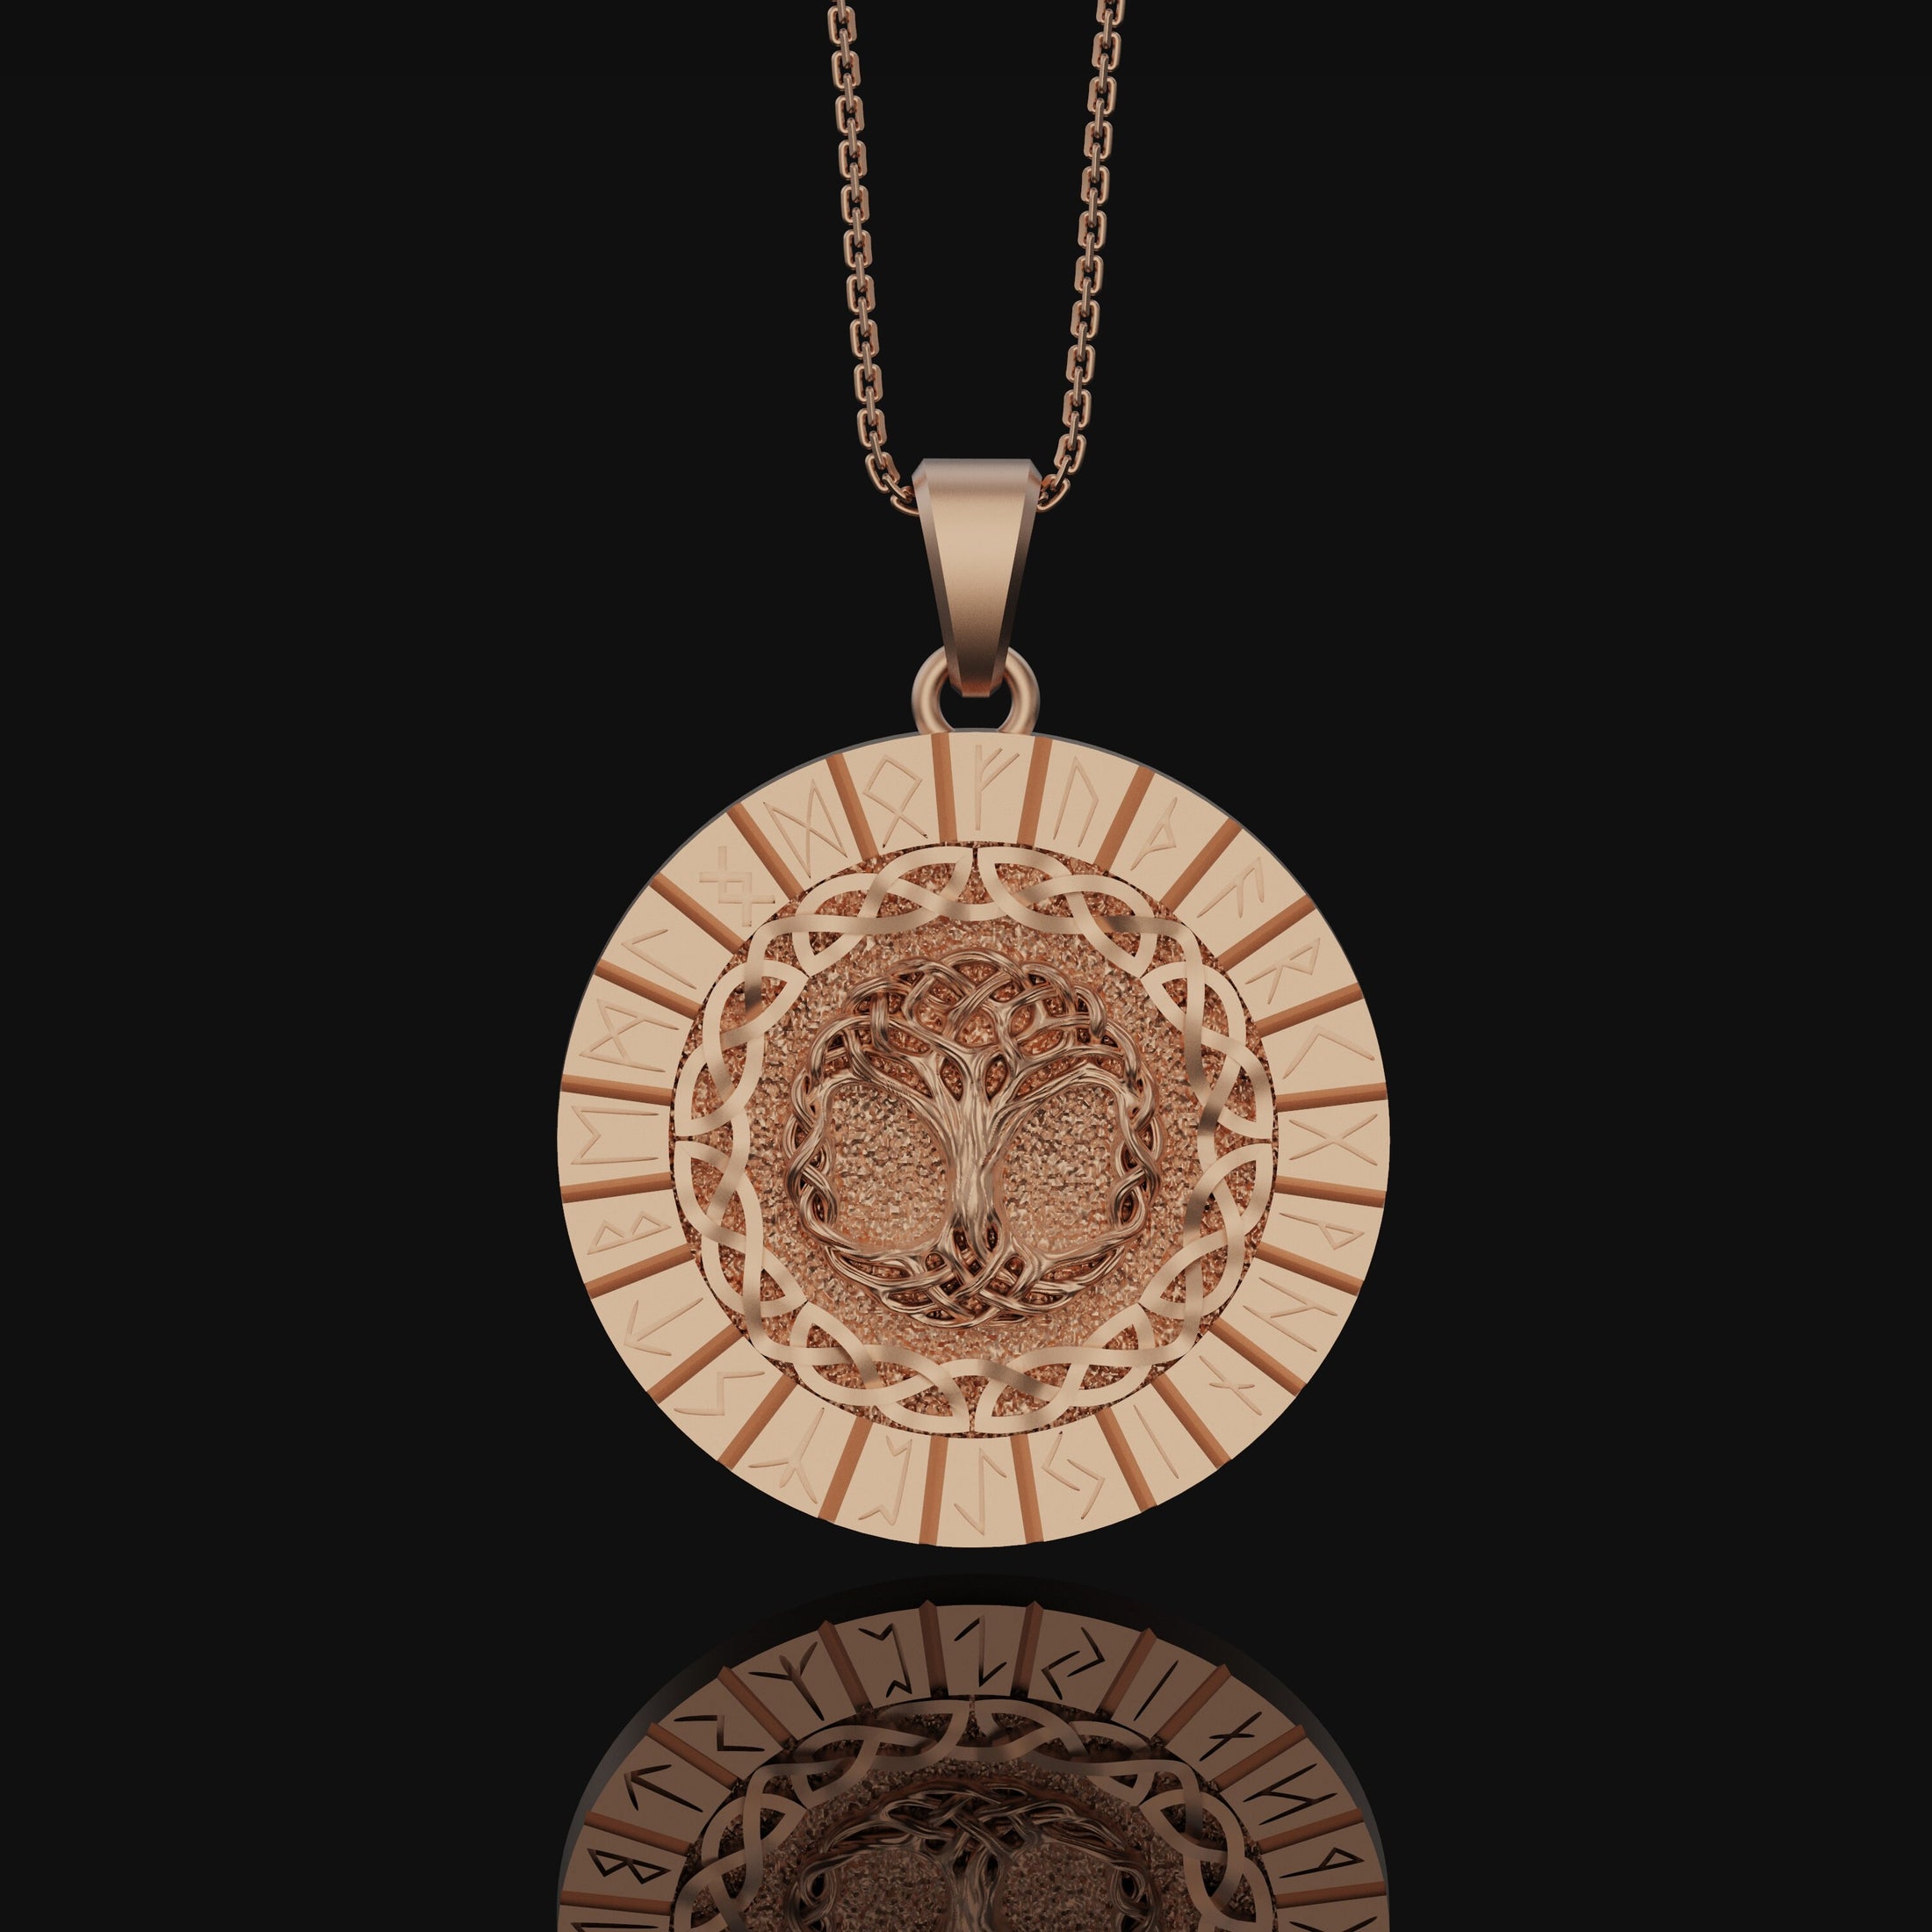 Tree Of Life Pendant, Yggdrasil Necklace, Christmas Gift, Norse, Protection Amulet, Pagan, Celtic Knot, Viking Jewelry, Runic Alphabet Rose Gold Finish